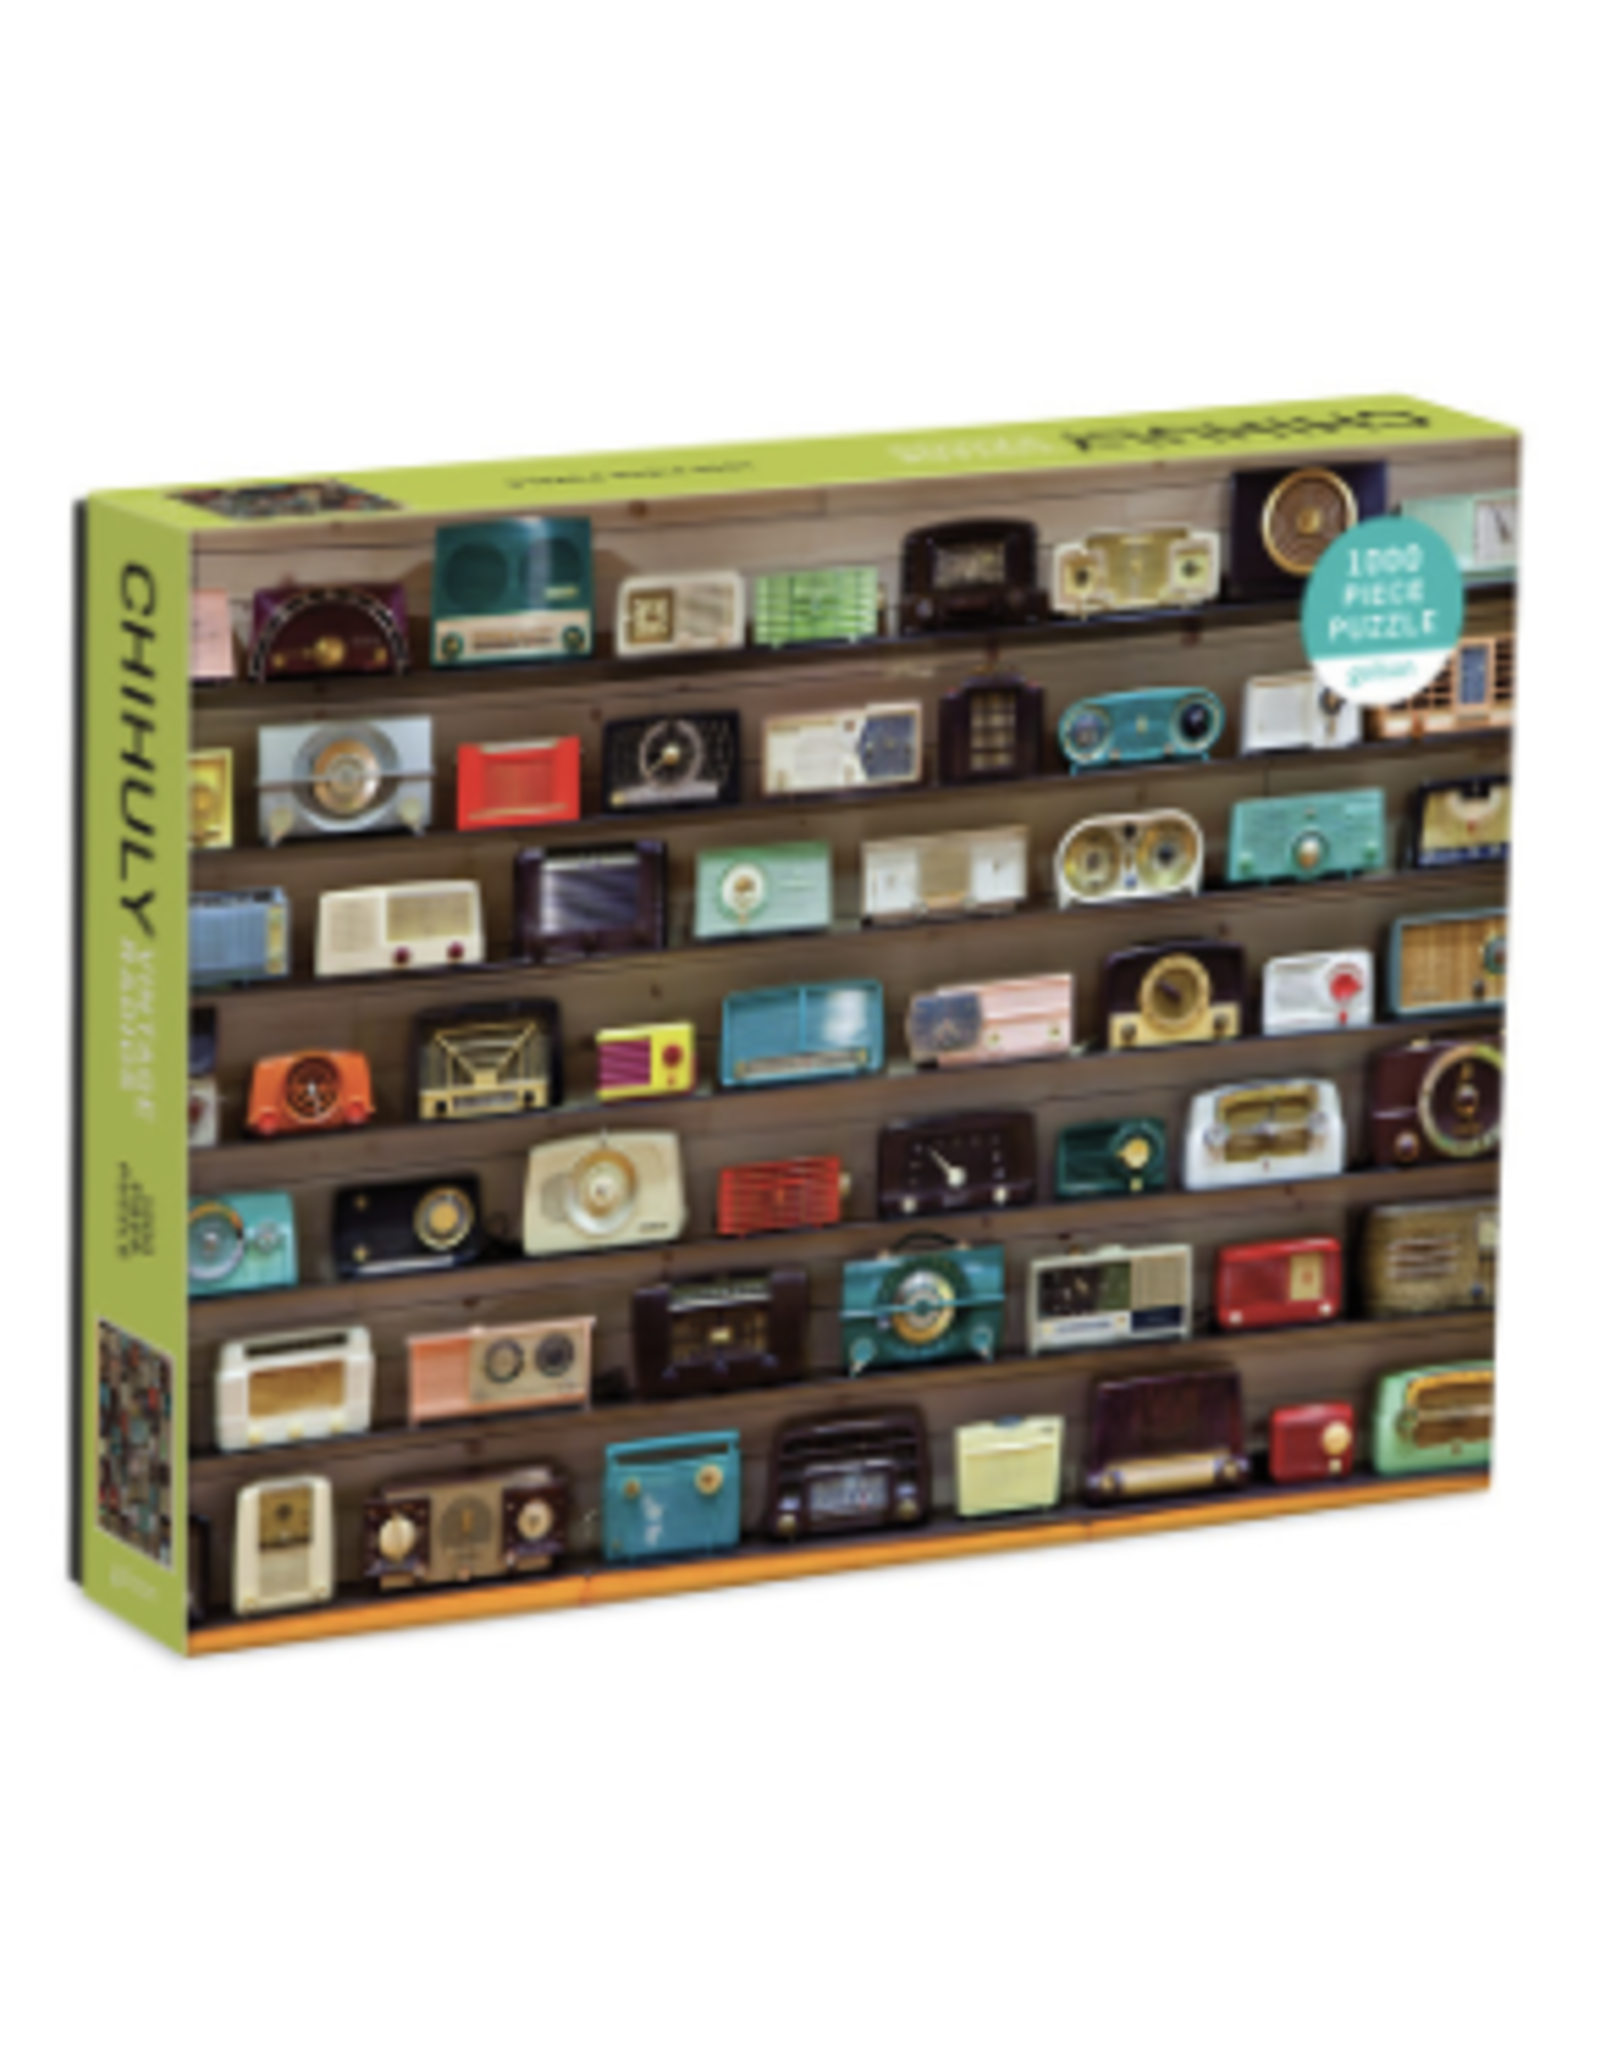 Chihuly Vintage Radios Puzzle - 1000 Pieces